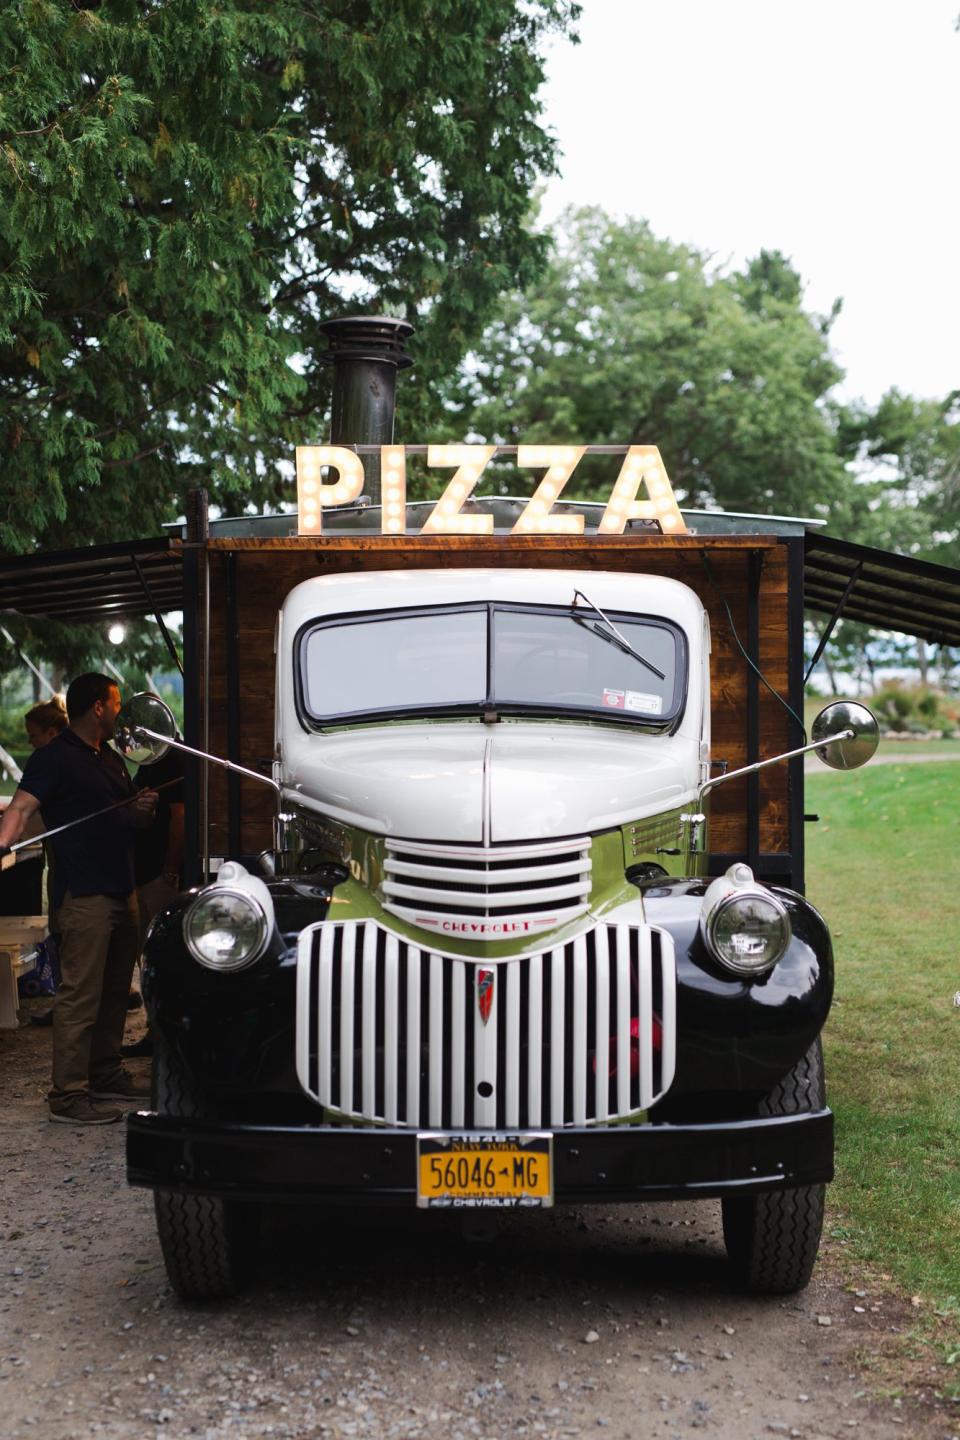 26 Delicious Wedding Ideas for Couples Crazy About Pizza